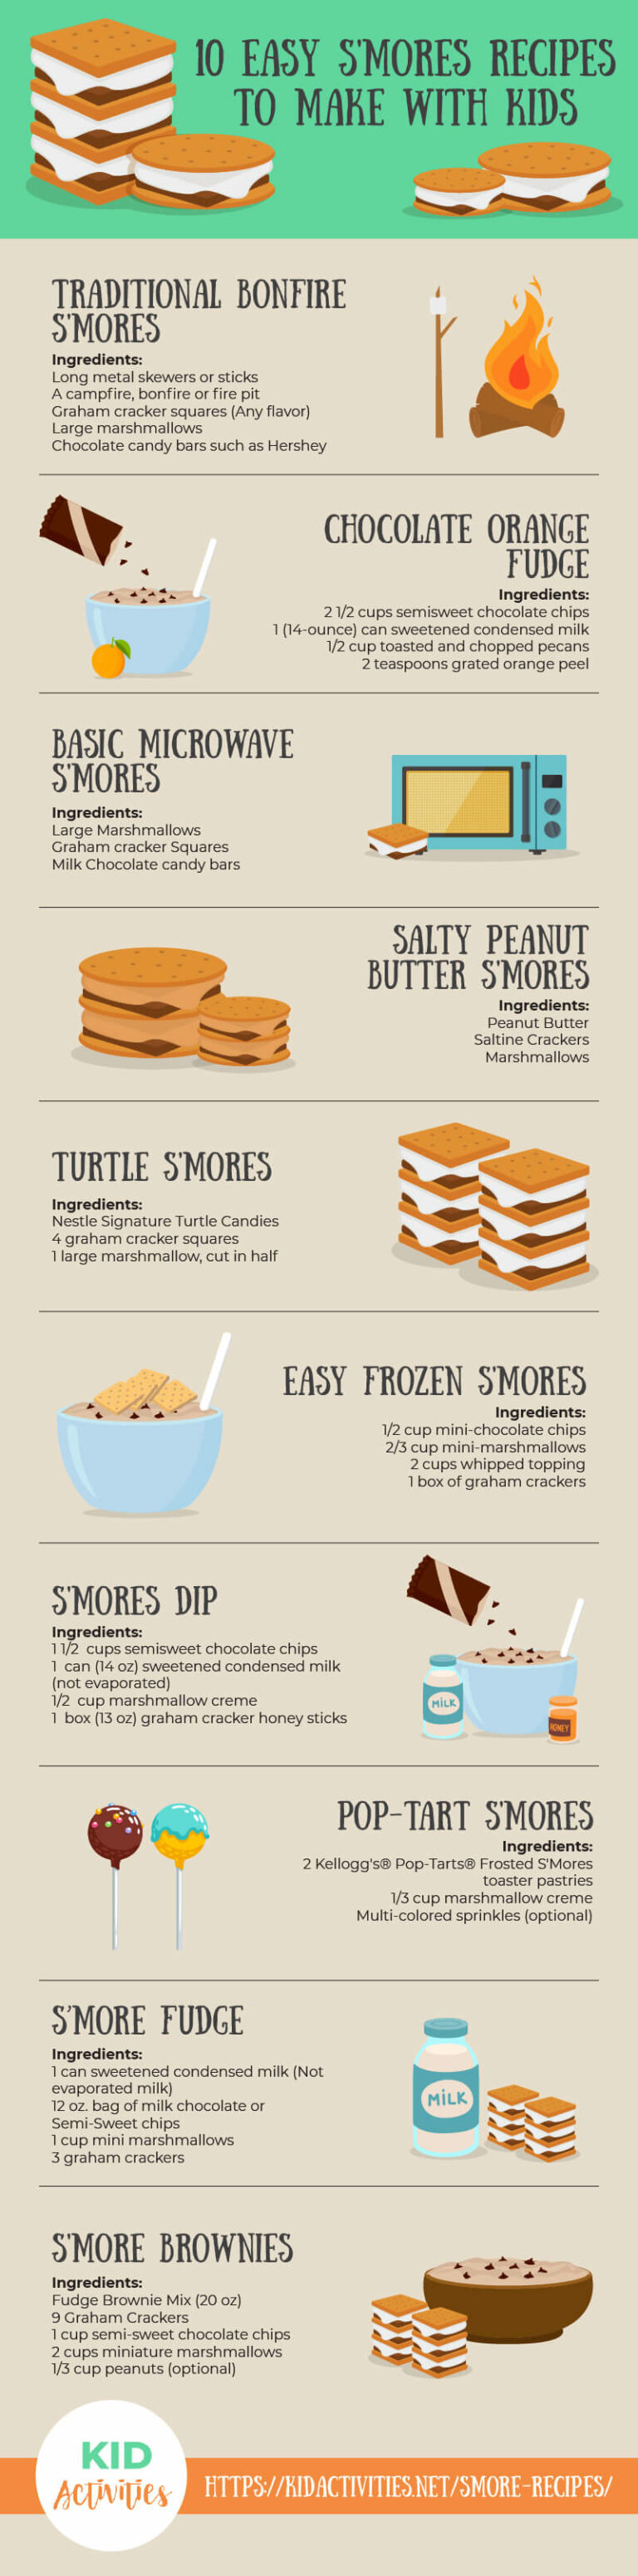 14 Easy Smore Recipes to Make with Kids